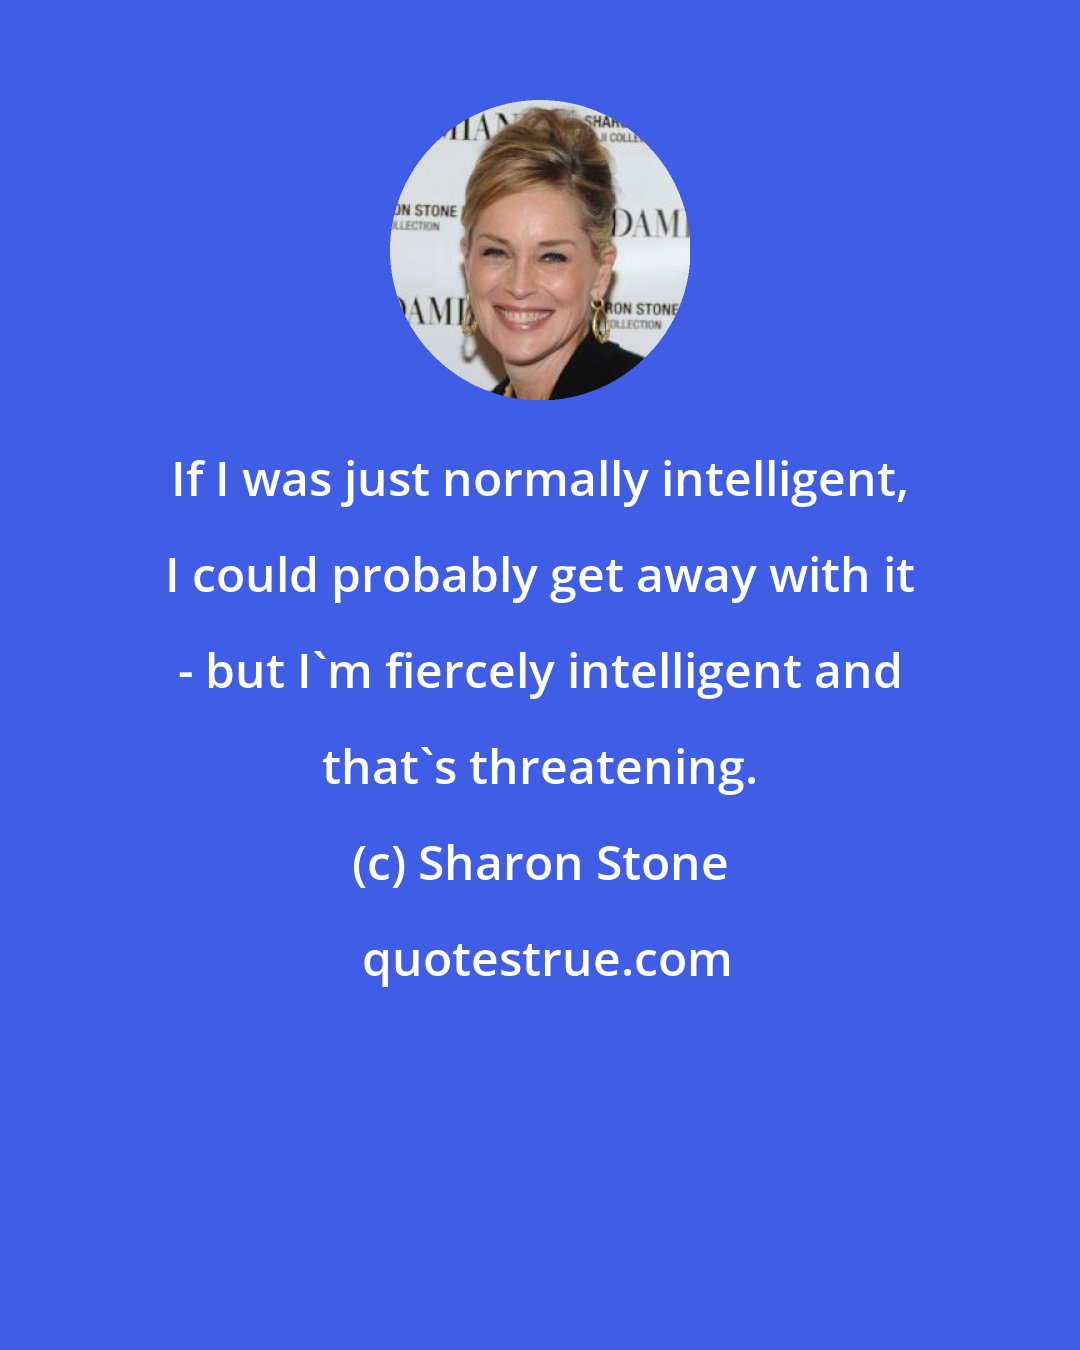 Sharon Stone: If I was just normally intelligent, I could probably get away with it - but I'm fiercely intelligent and that's threatening.